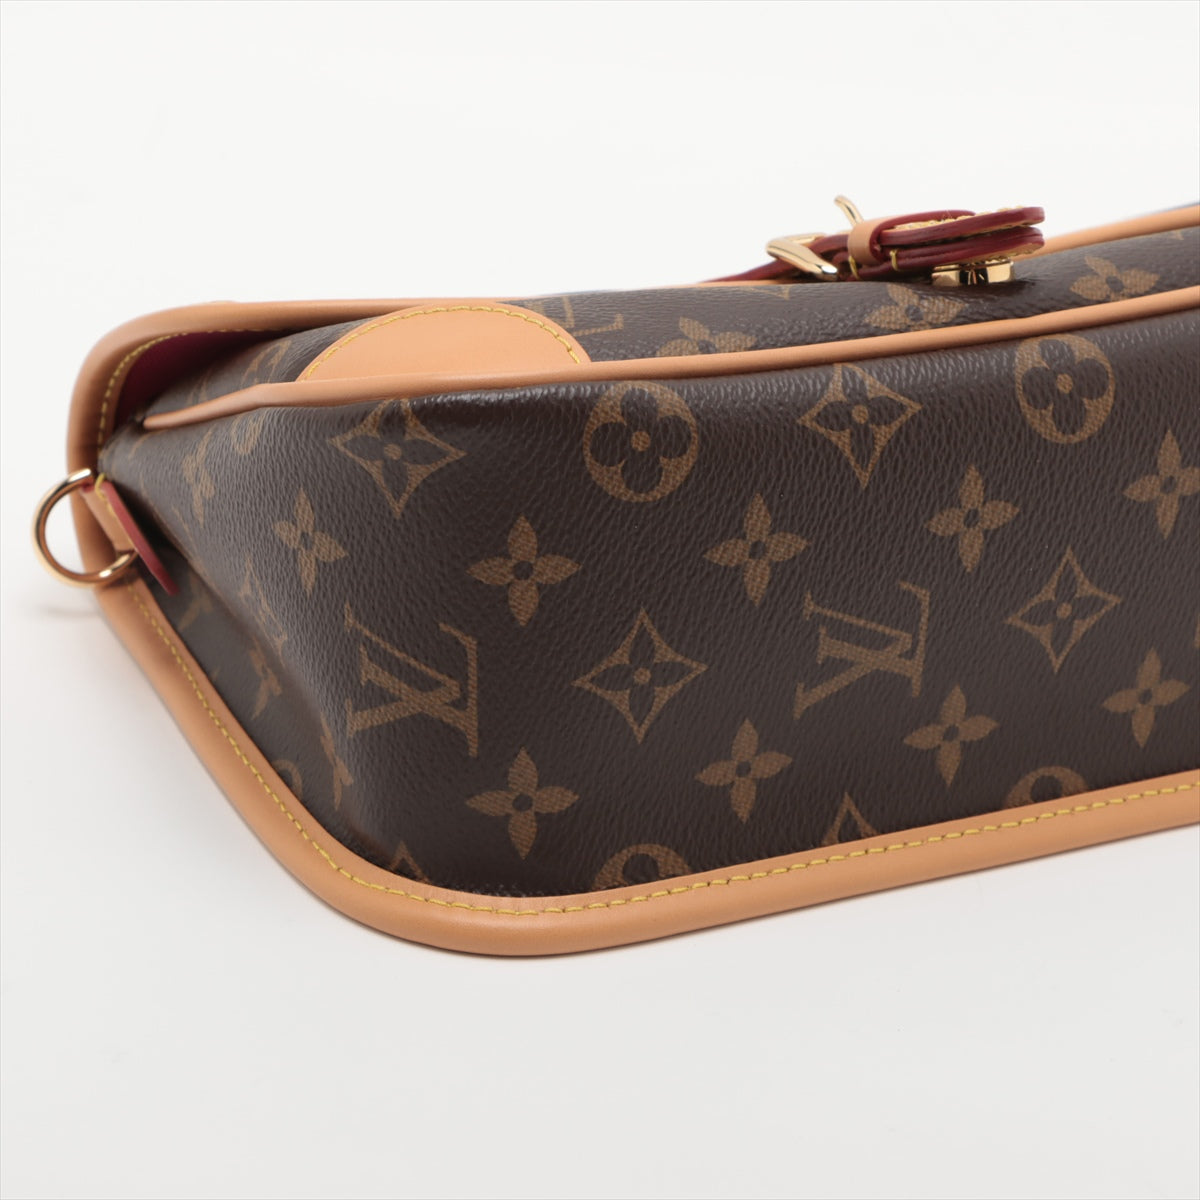 Louis Vuitton Monogram Dianu NM PM M45985 There was an RFID response